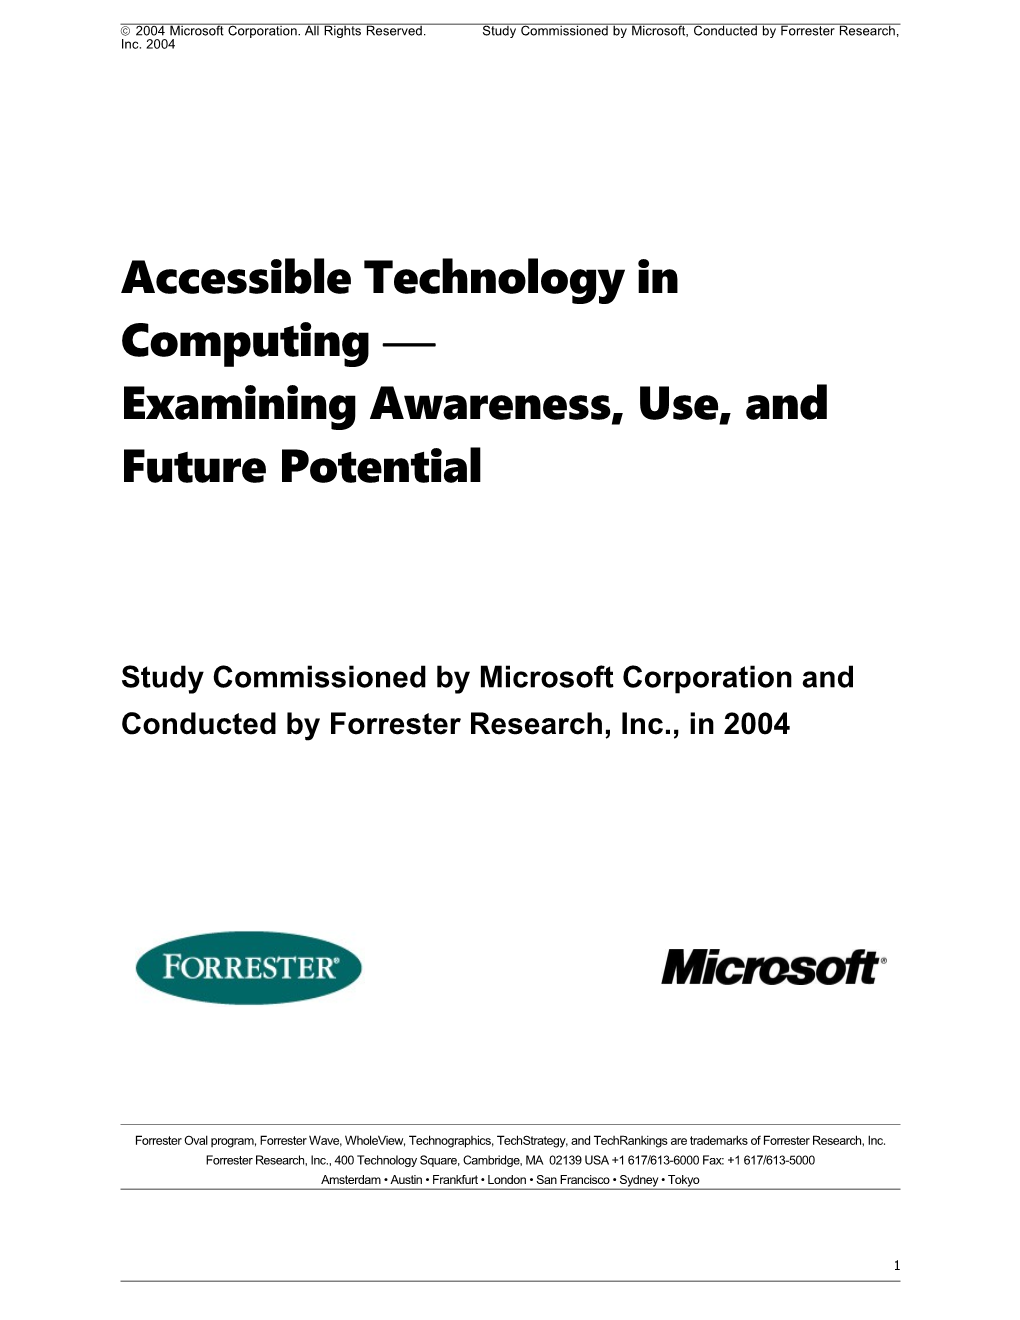 Accessible Technology and Computing Examining Awareness, Use, and Future Potential